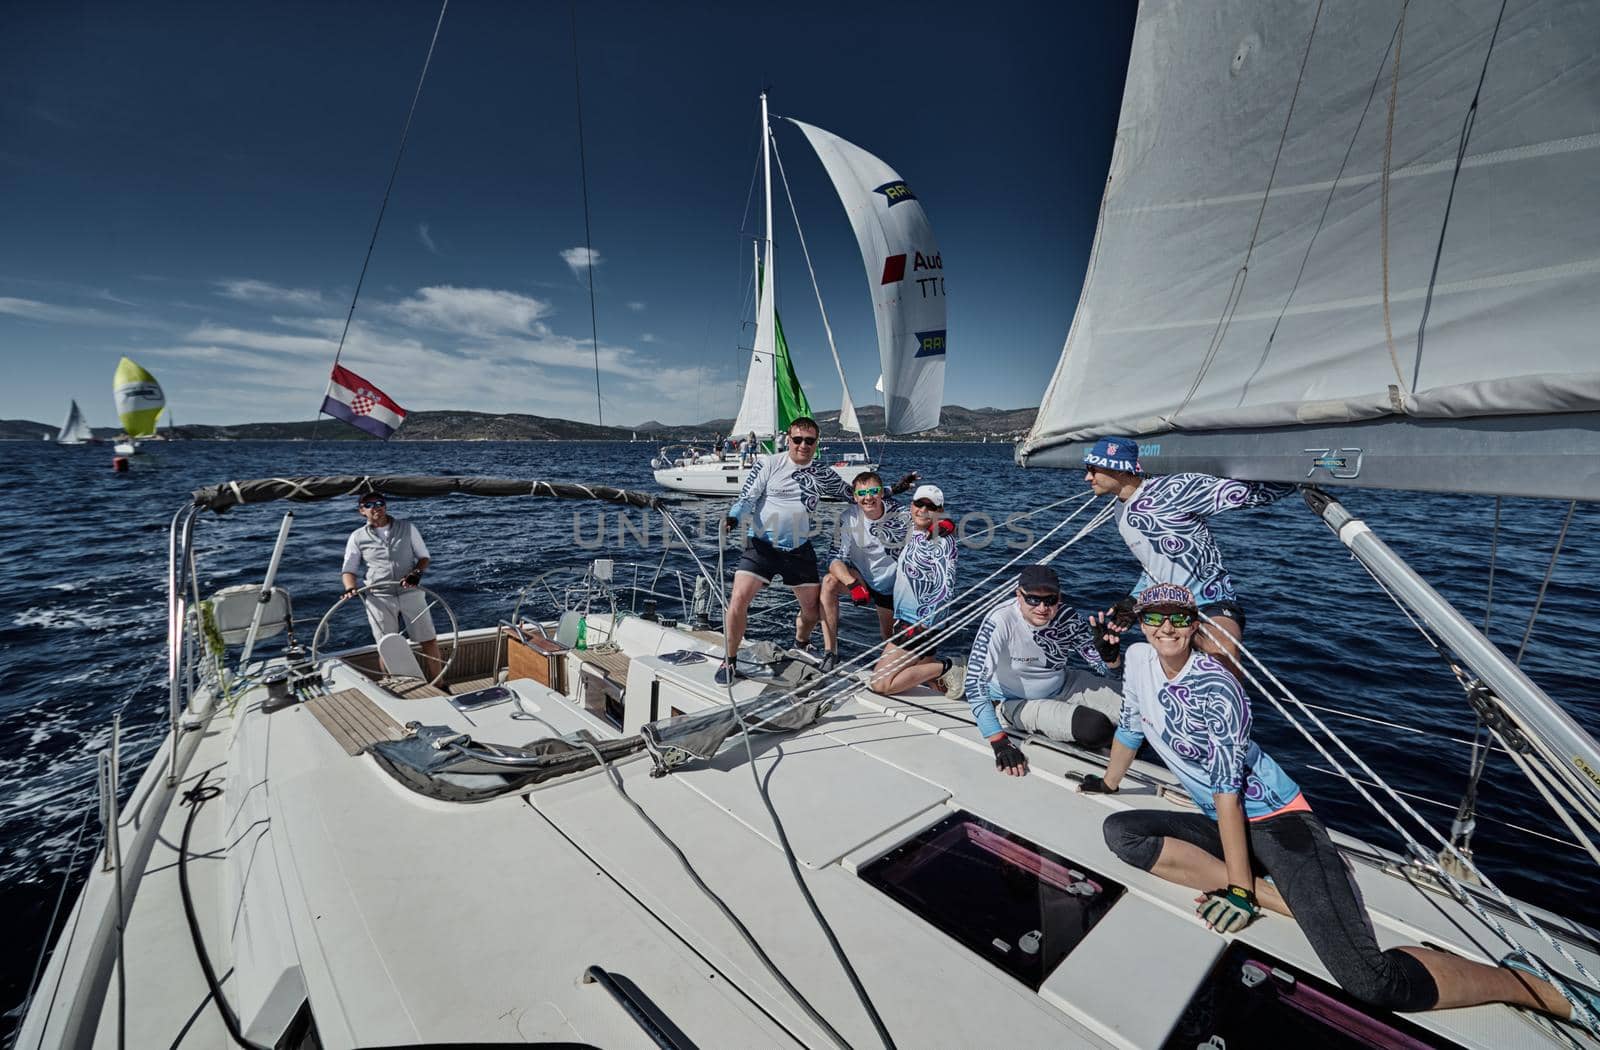 Croatia, Mediterranean Sea, 18 September 2019: The team of sailboat turns off the boat, sailboats compete in a sail regatta, The team works, pulls to a rope, a steering wheel, multicolored spinnakers by vladimirdrozdin